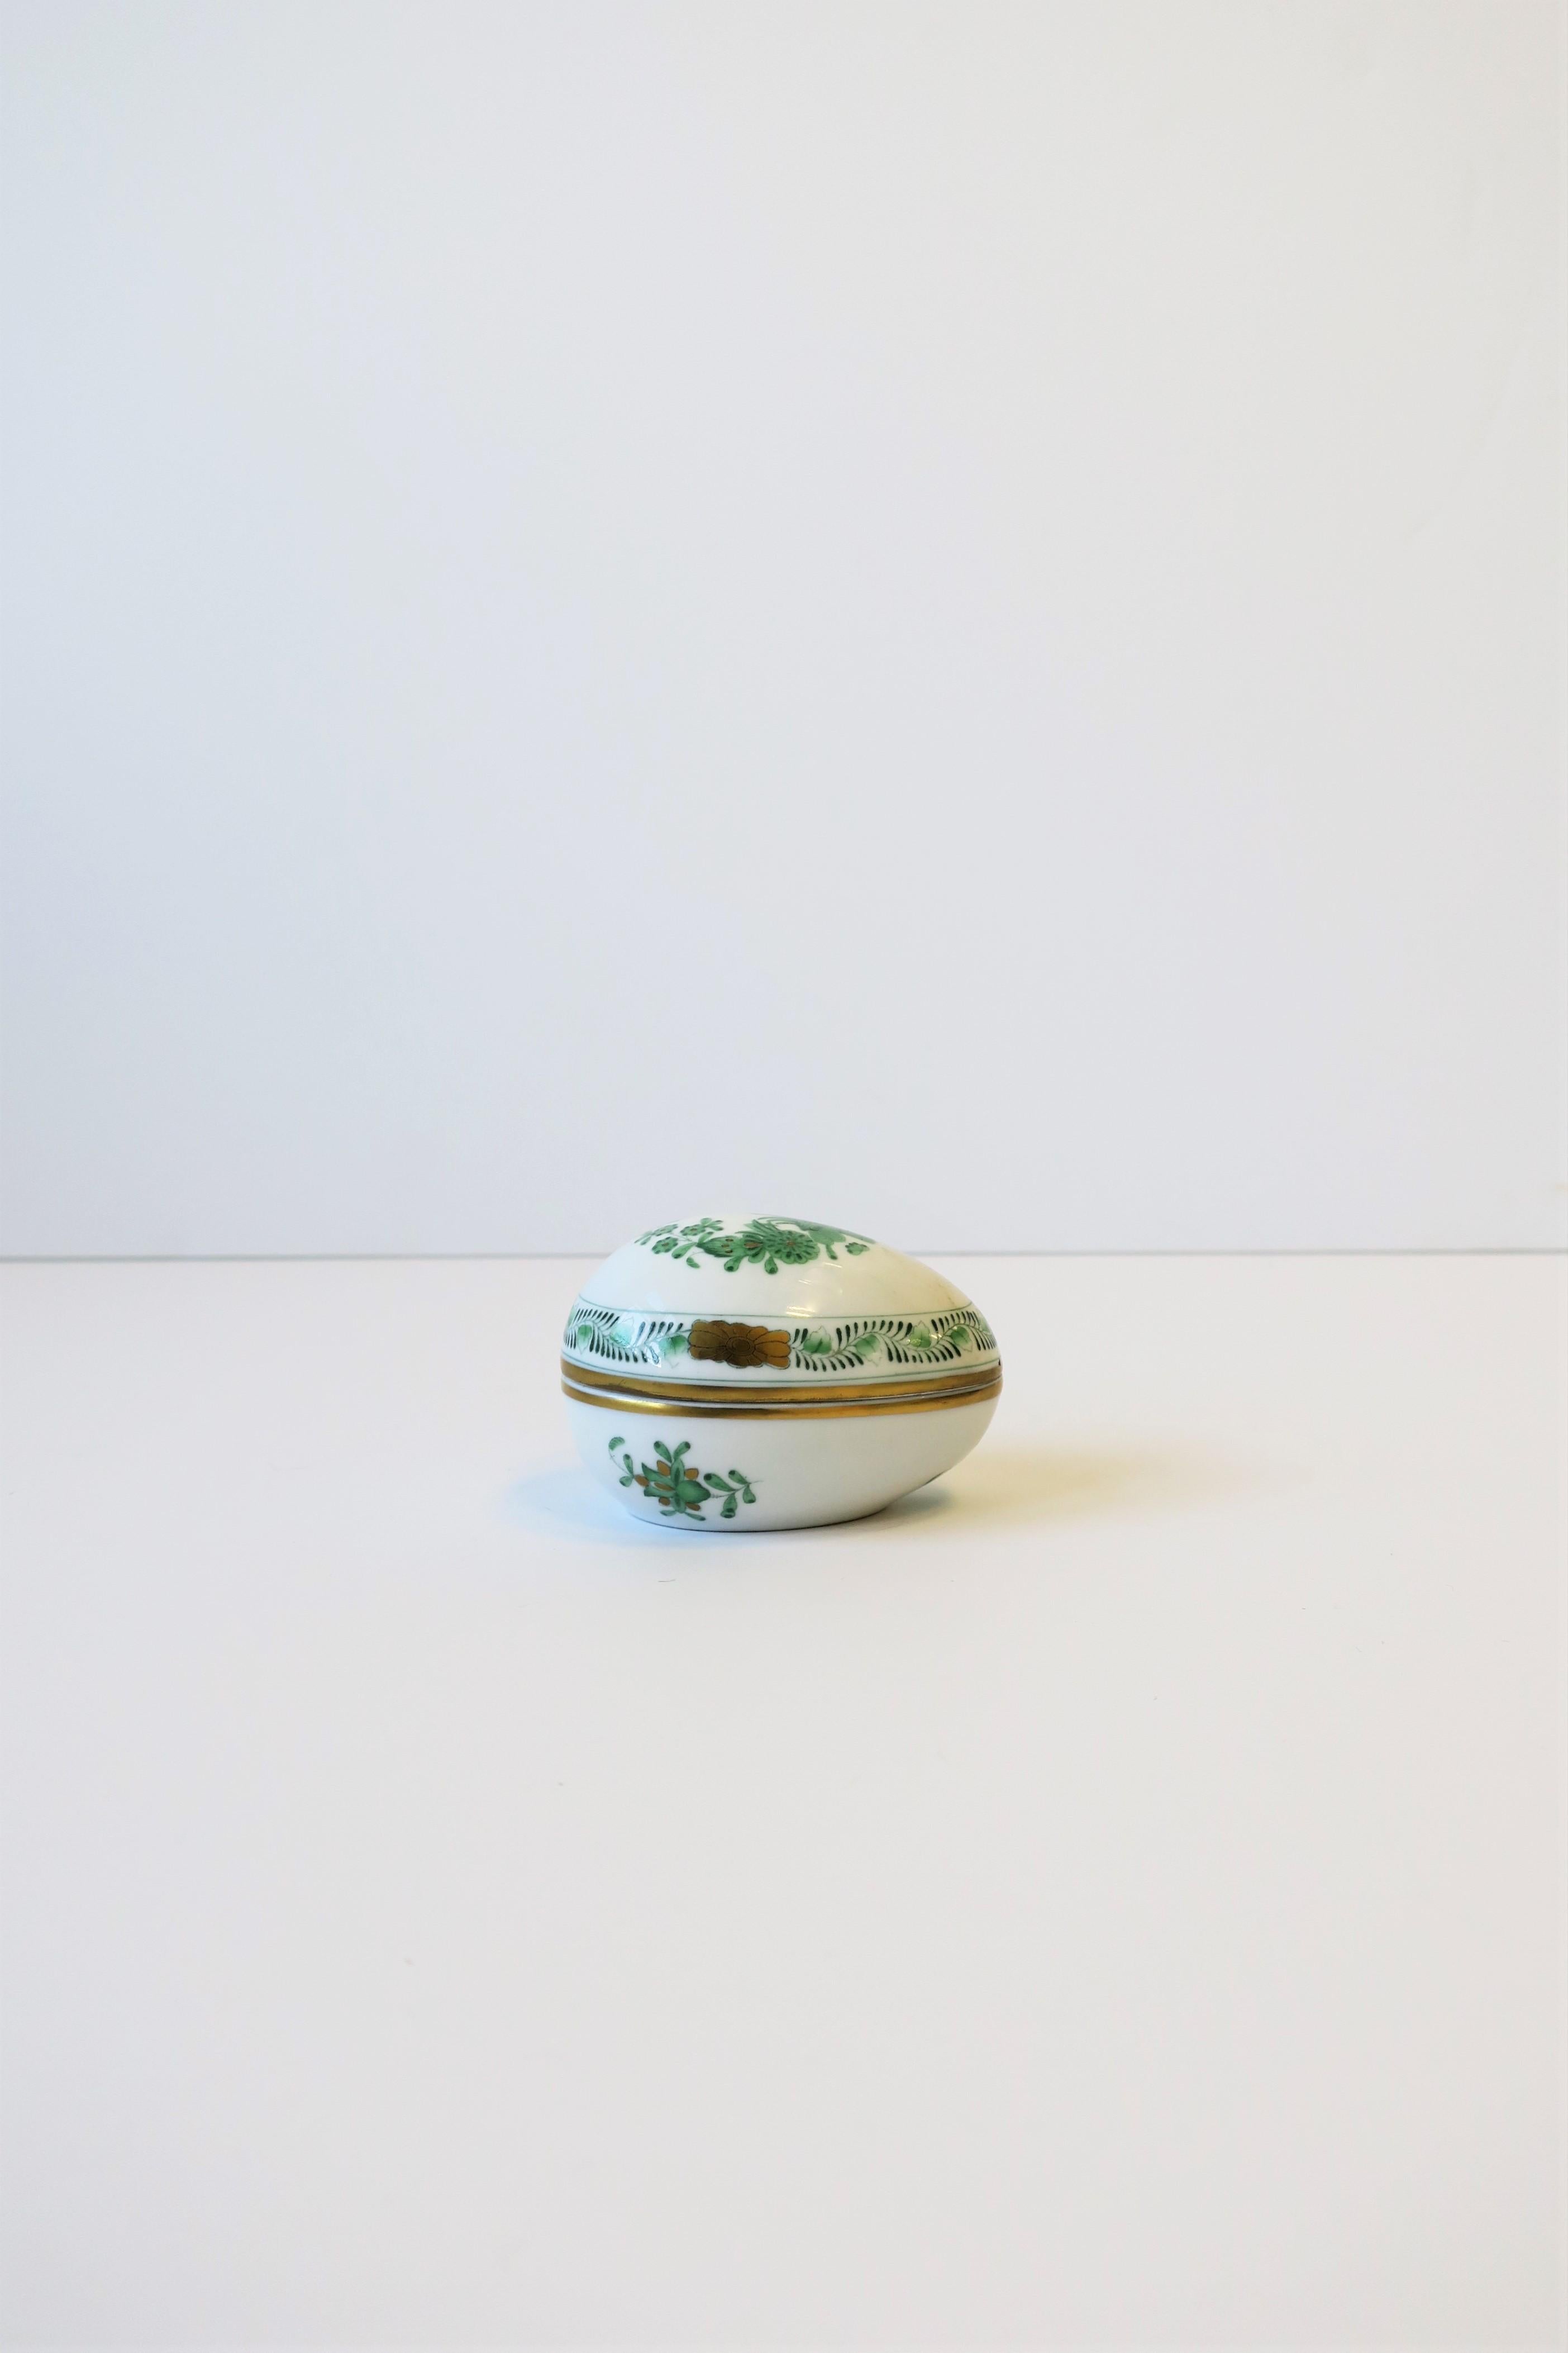 A beautiful white porcelain hand painted egg-shaped box from luxury maker HEREND, Hungary, circa 20th century. This Herend white porcelain egg-shaped box is hand painted by artist in emerald green and gold hues with a modern floral design. Box can